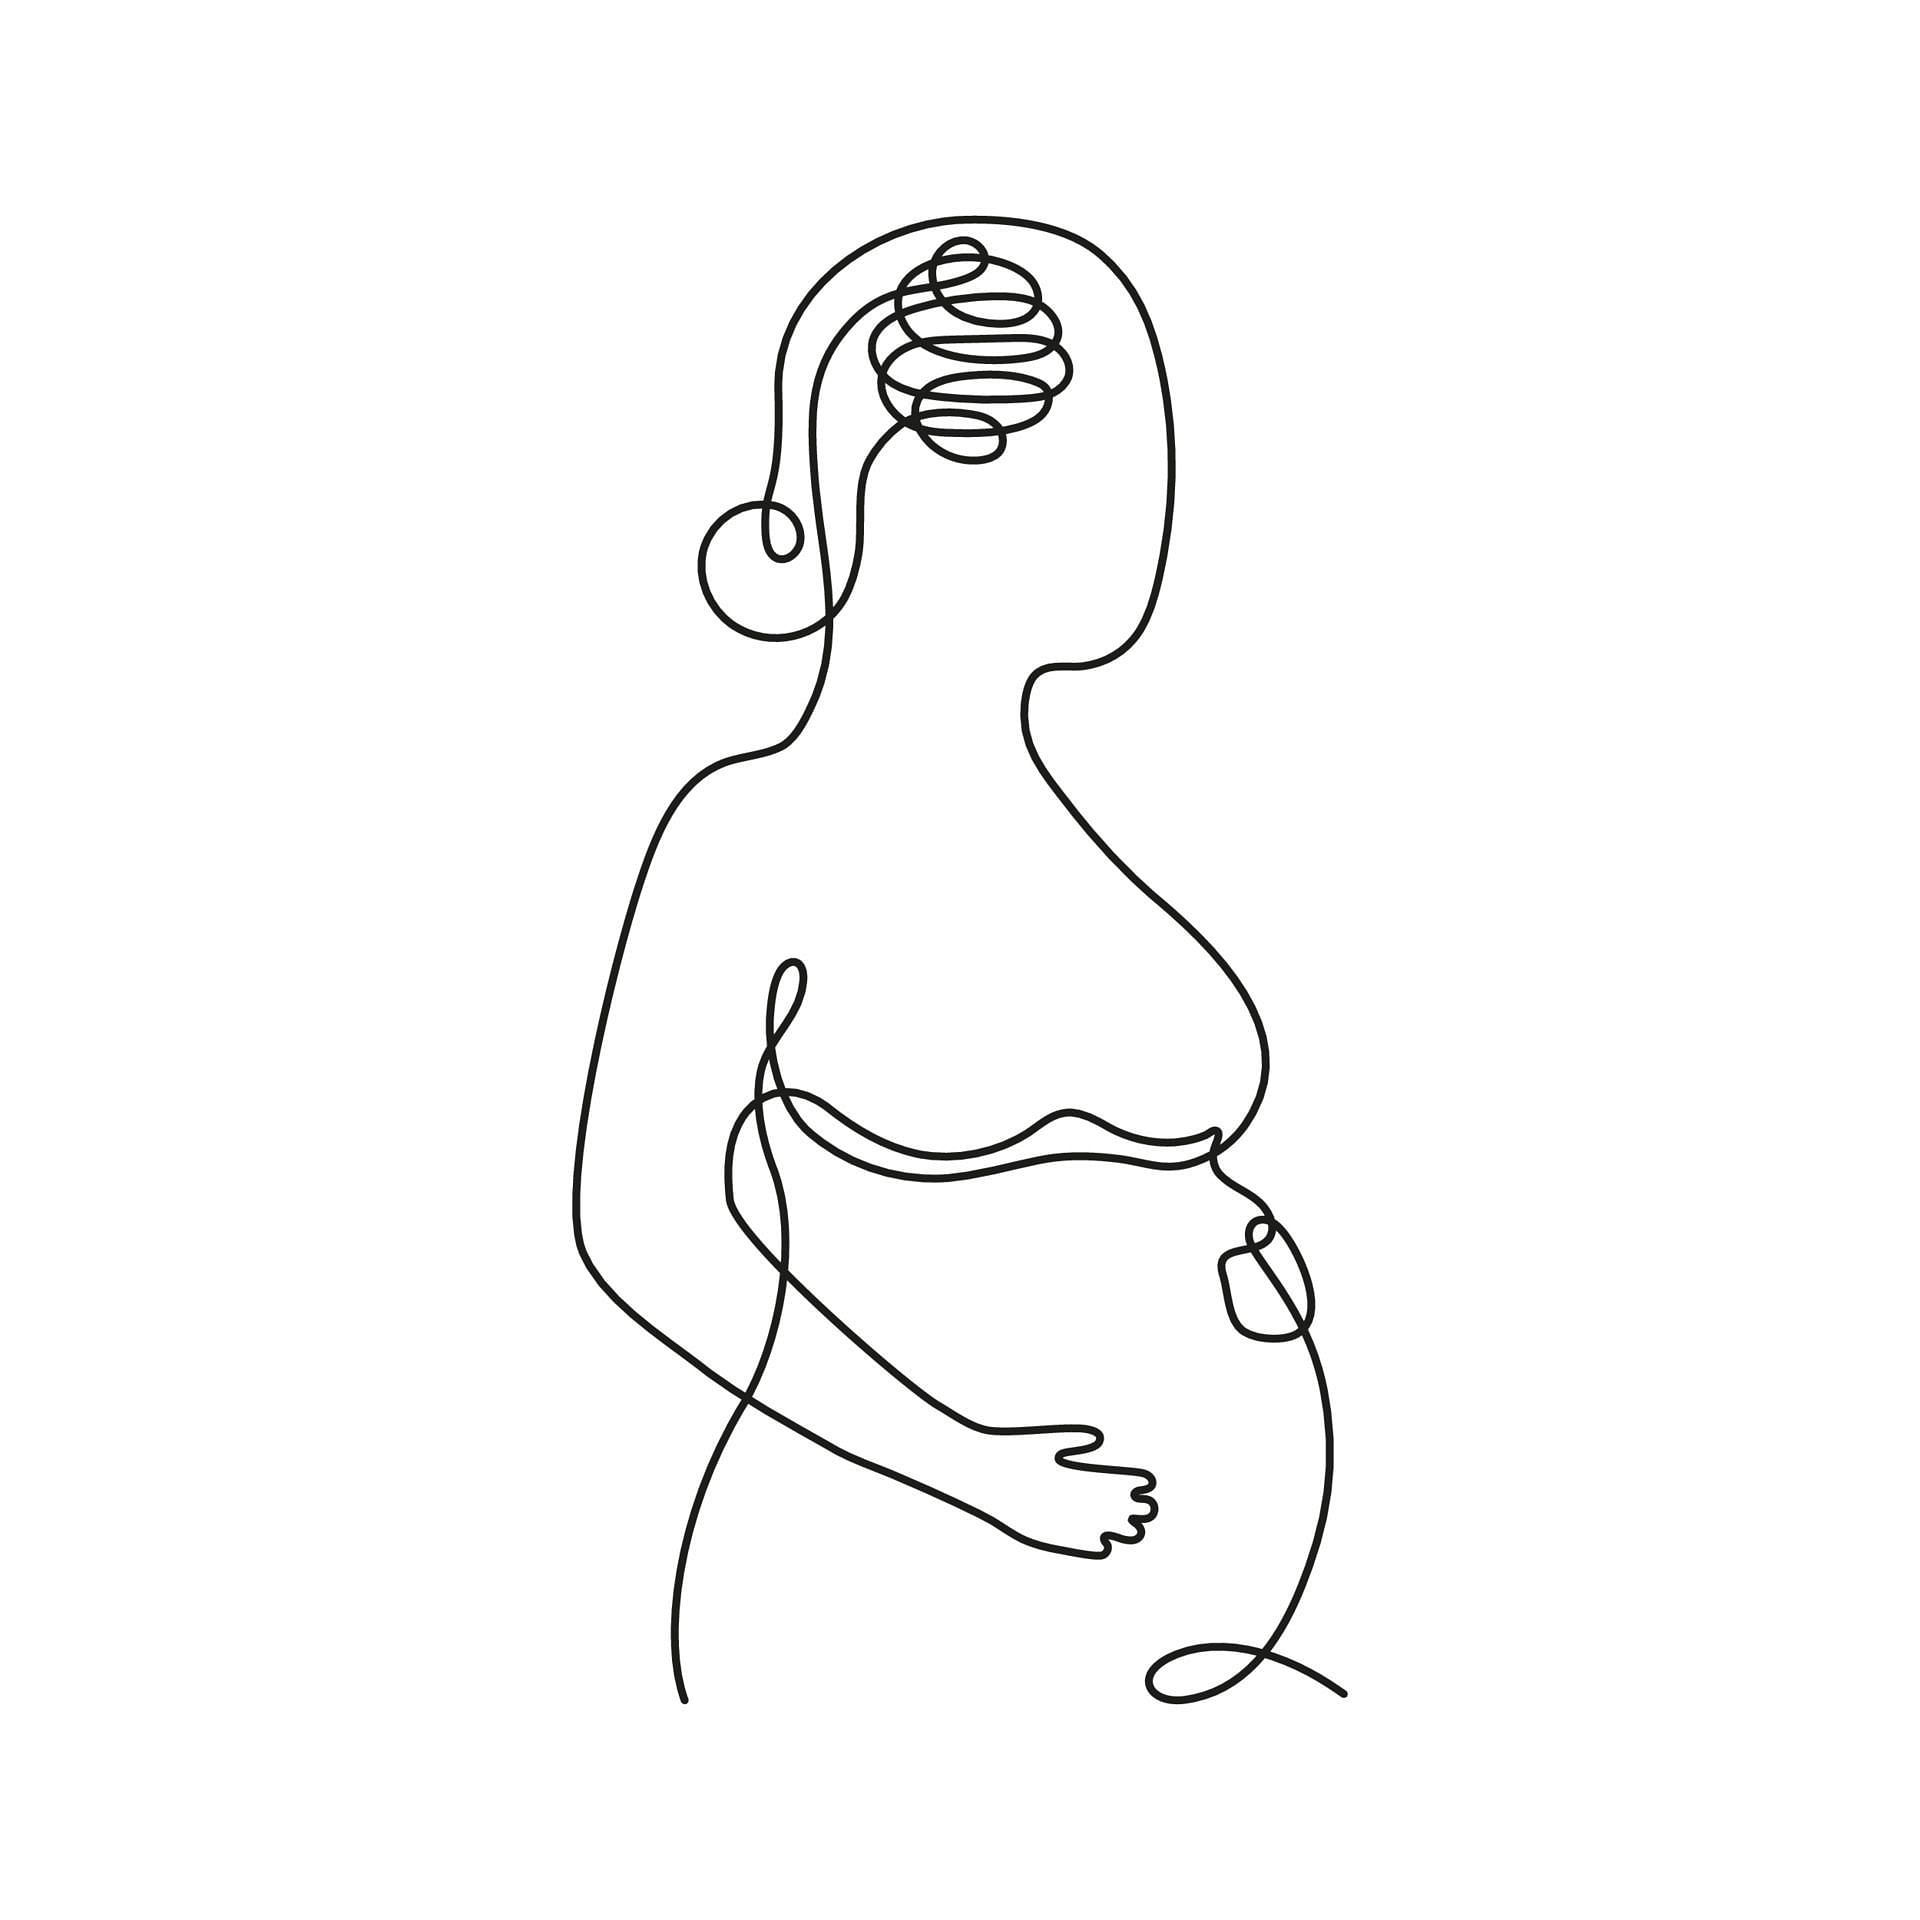 Pregnancy is a time of transition and can impact your mental health in unique ways. (Image via Vecteezy/ Juju)